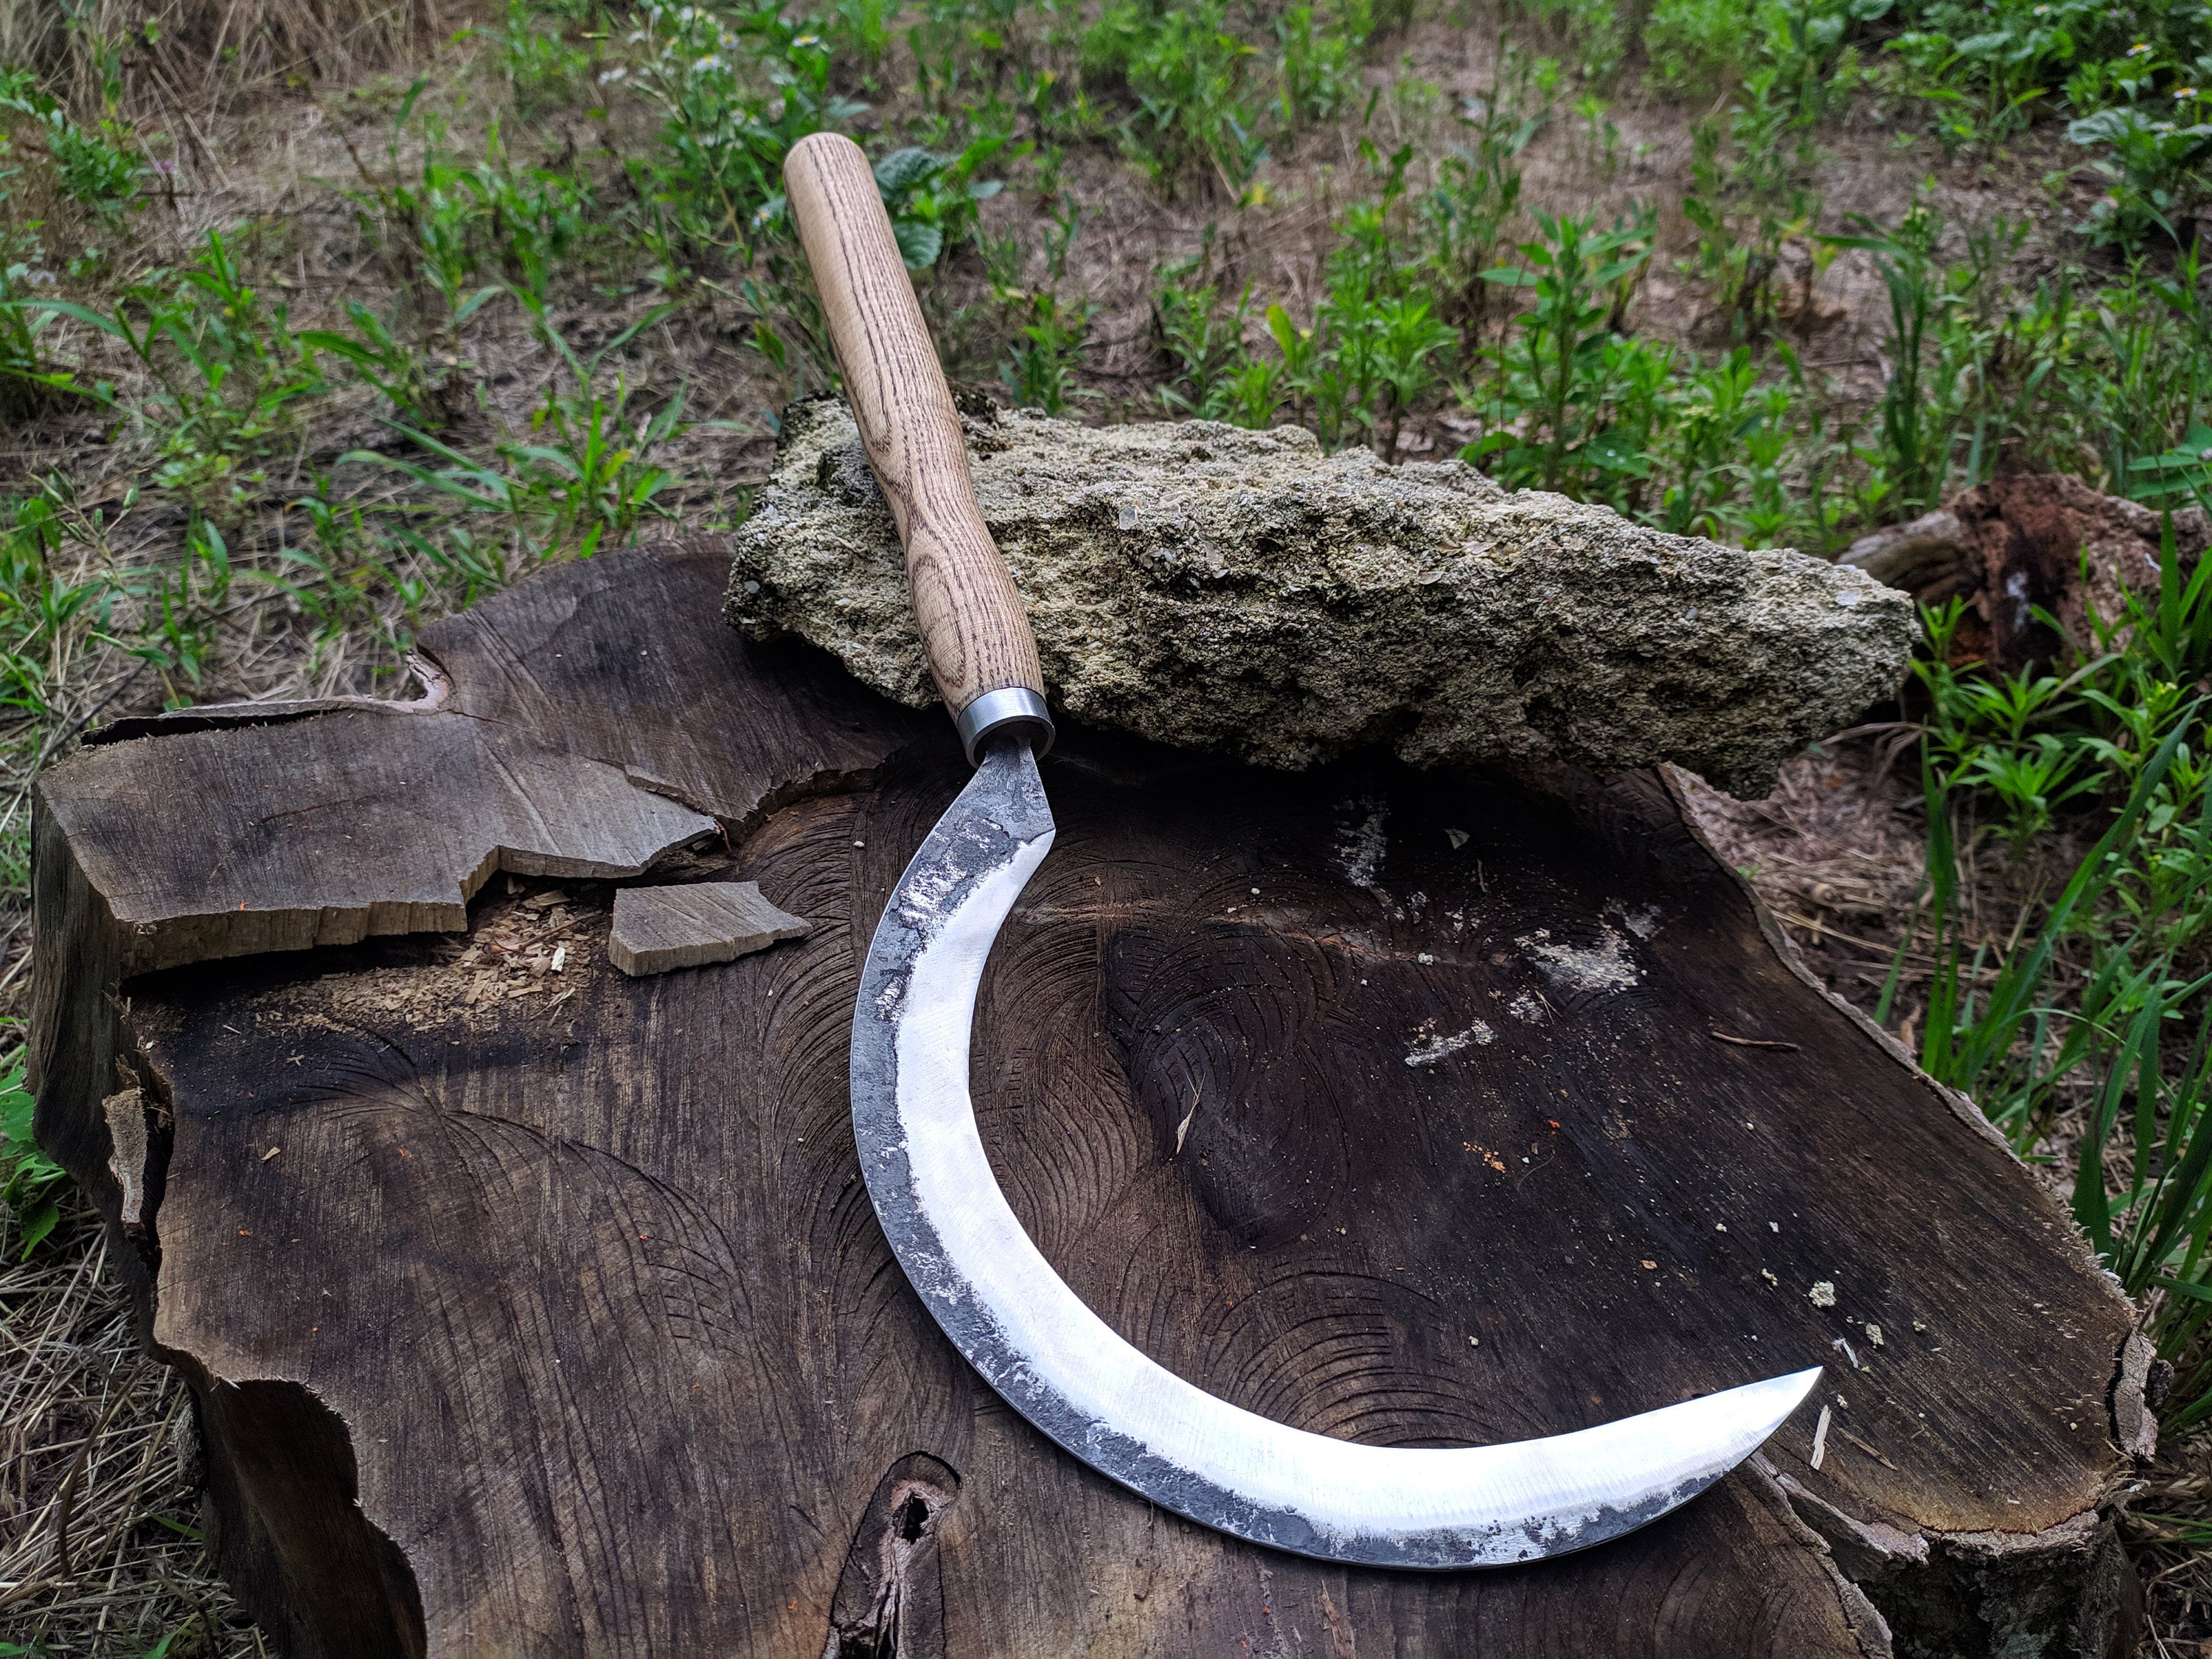 Handmade Forged Scythe. Forged Braid Handmade for Collecting Herbs